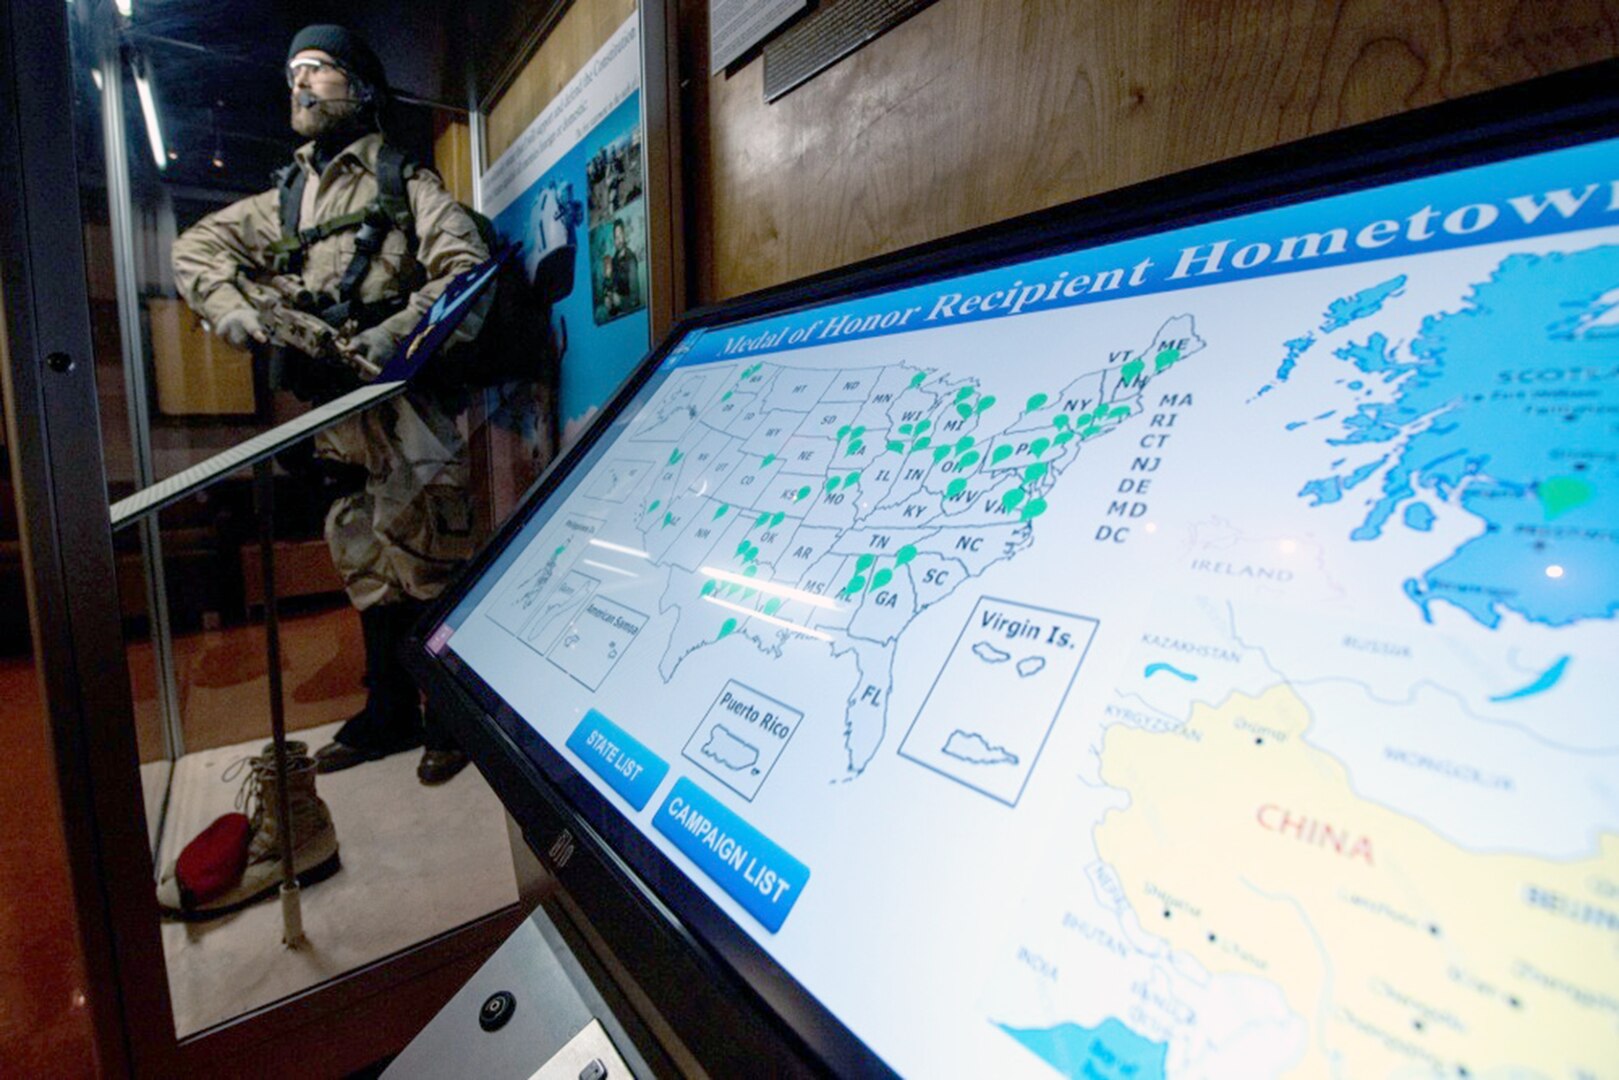 The Medal of Honor exhibit in the Airman Heritage Museum at Joint Base San Antonio-Lackland. The exhibit is an interactive touchscreen display that showcases the hometown, citation and photograph of 61 air component Medal of Honor recipients.